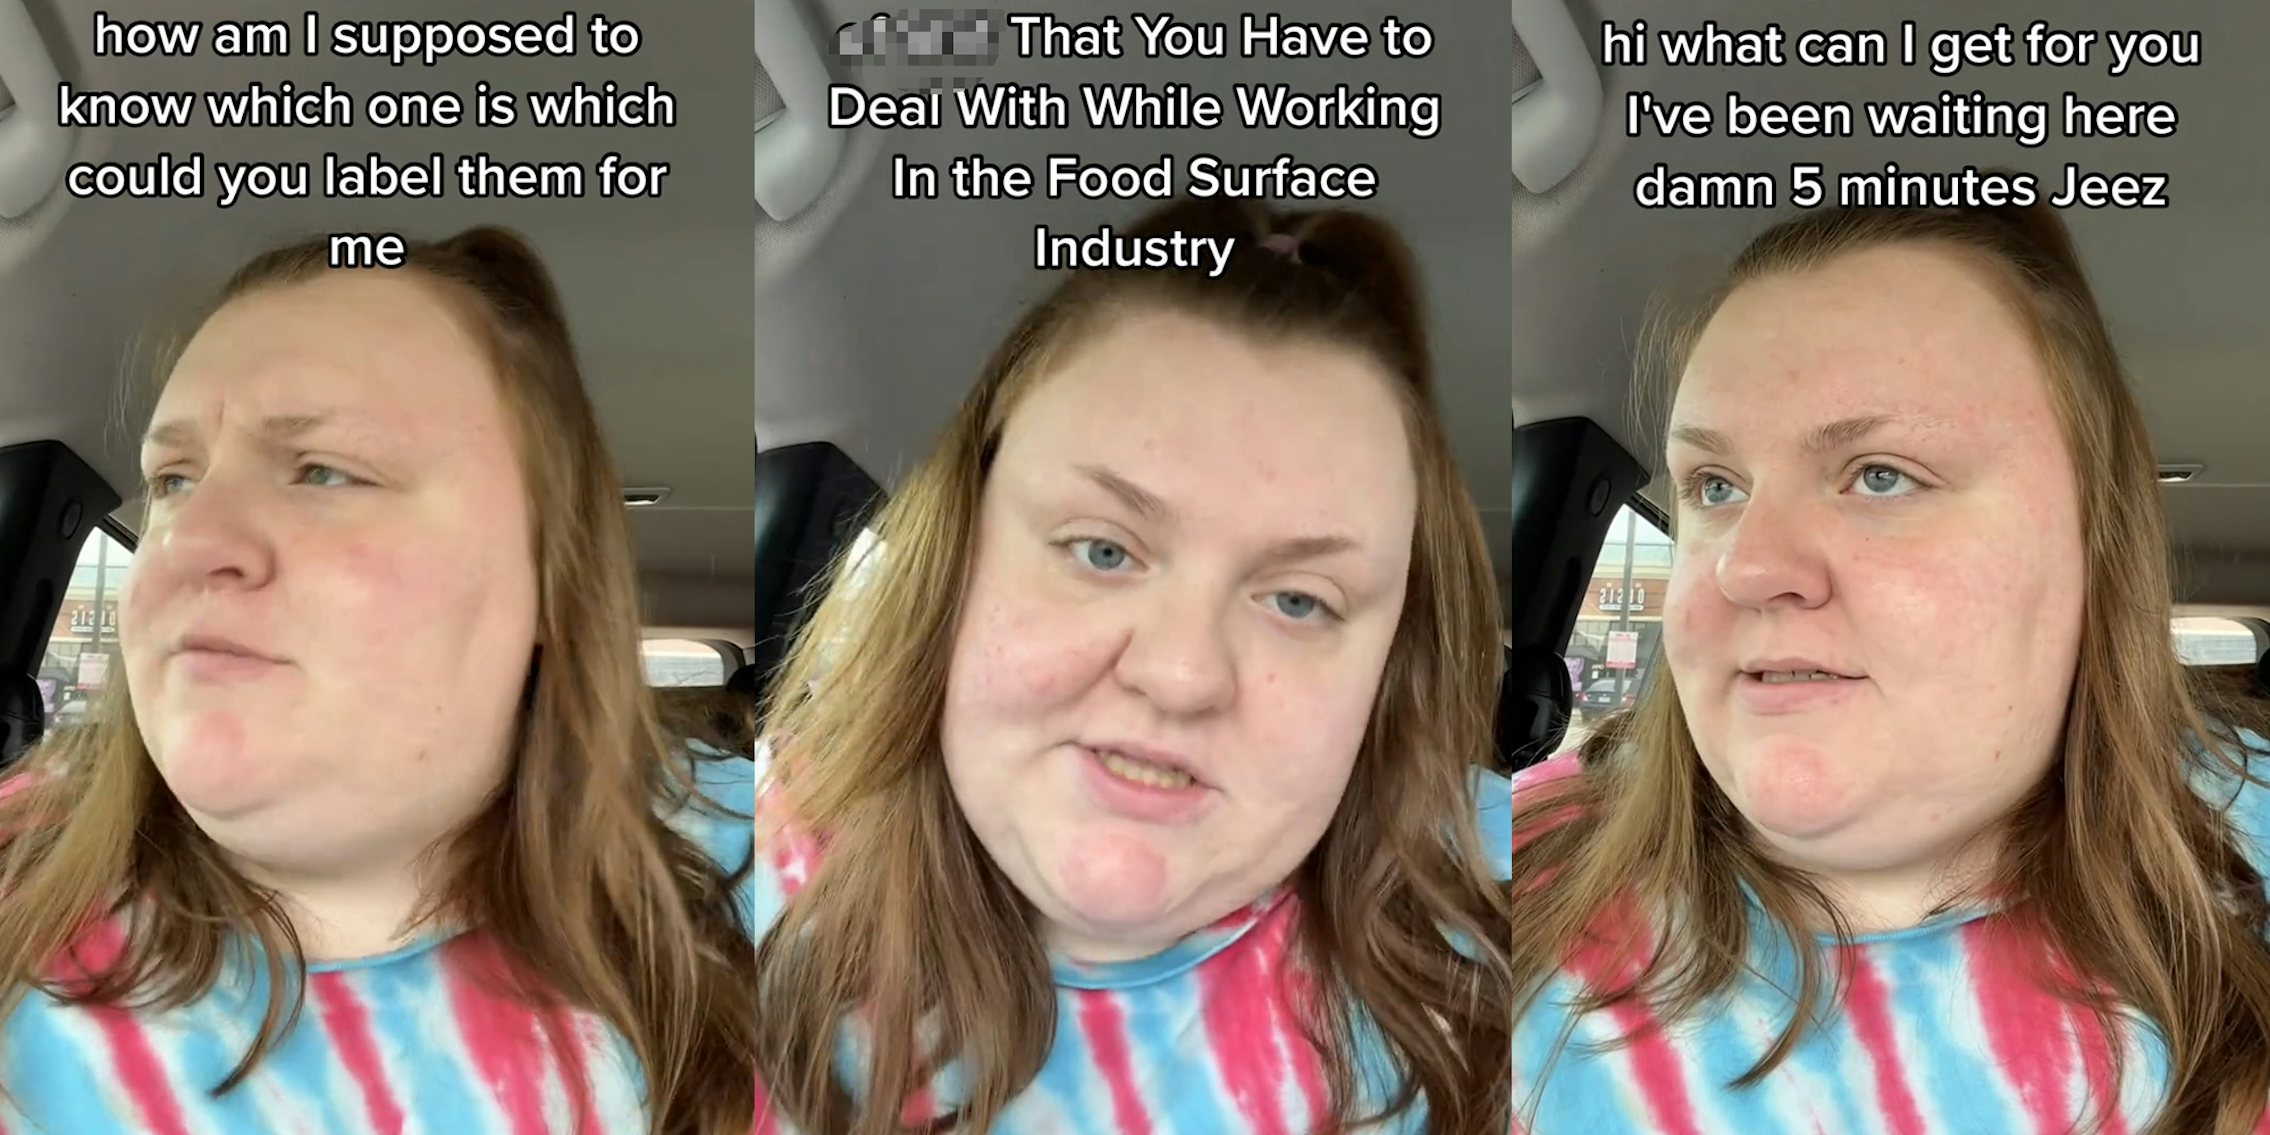 Fast-food worker explaining interactions she has experienced with customers